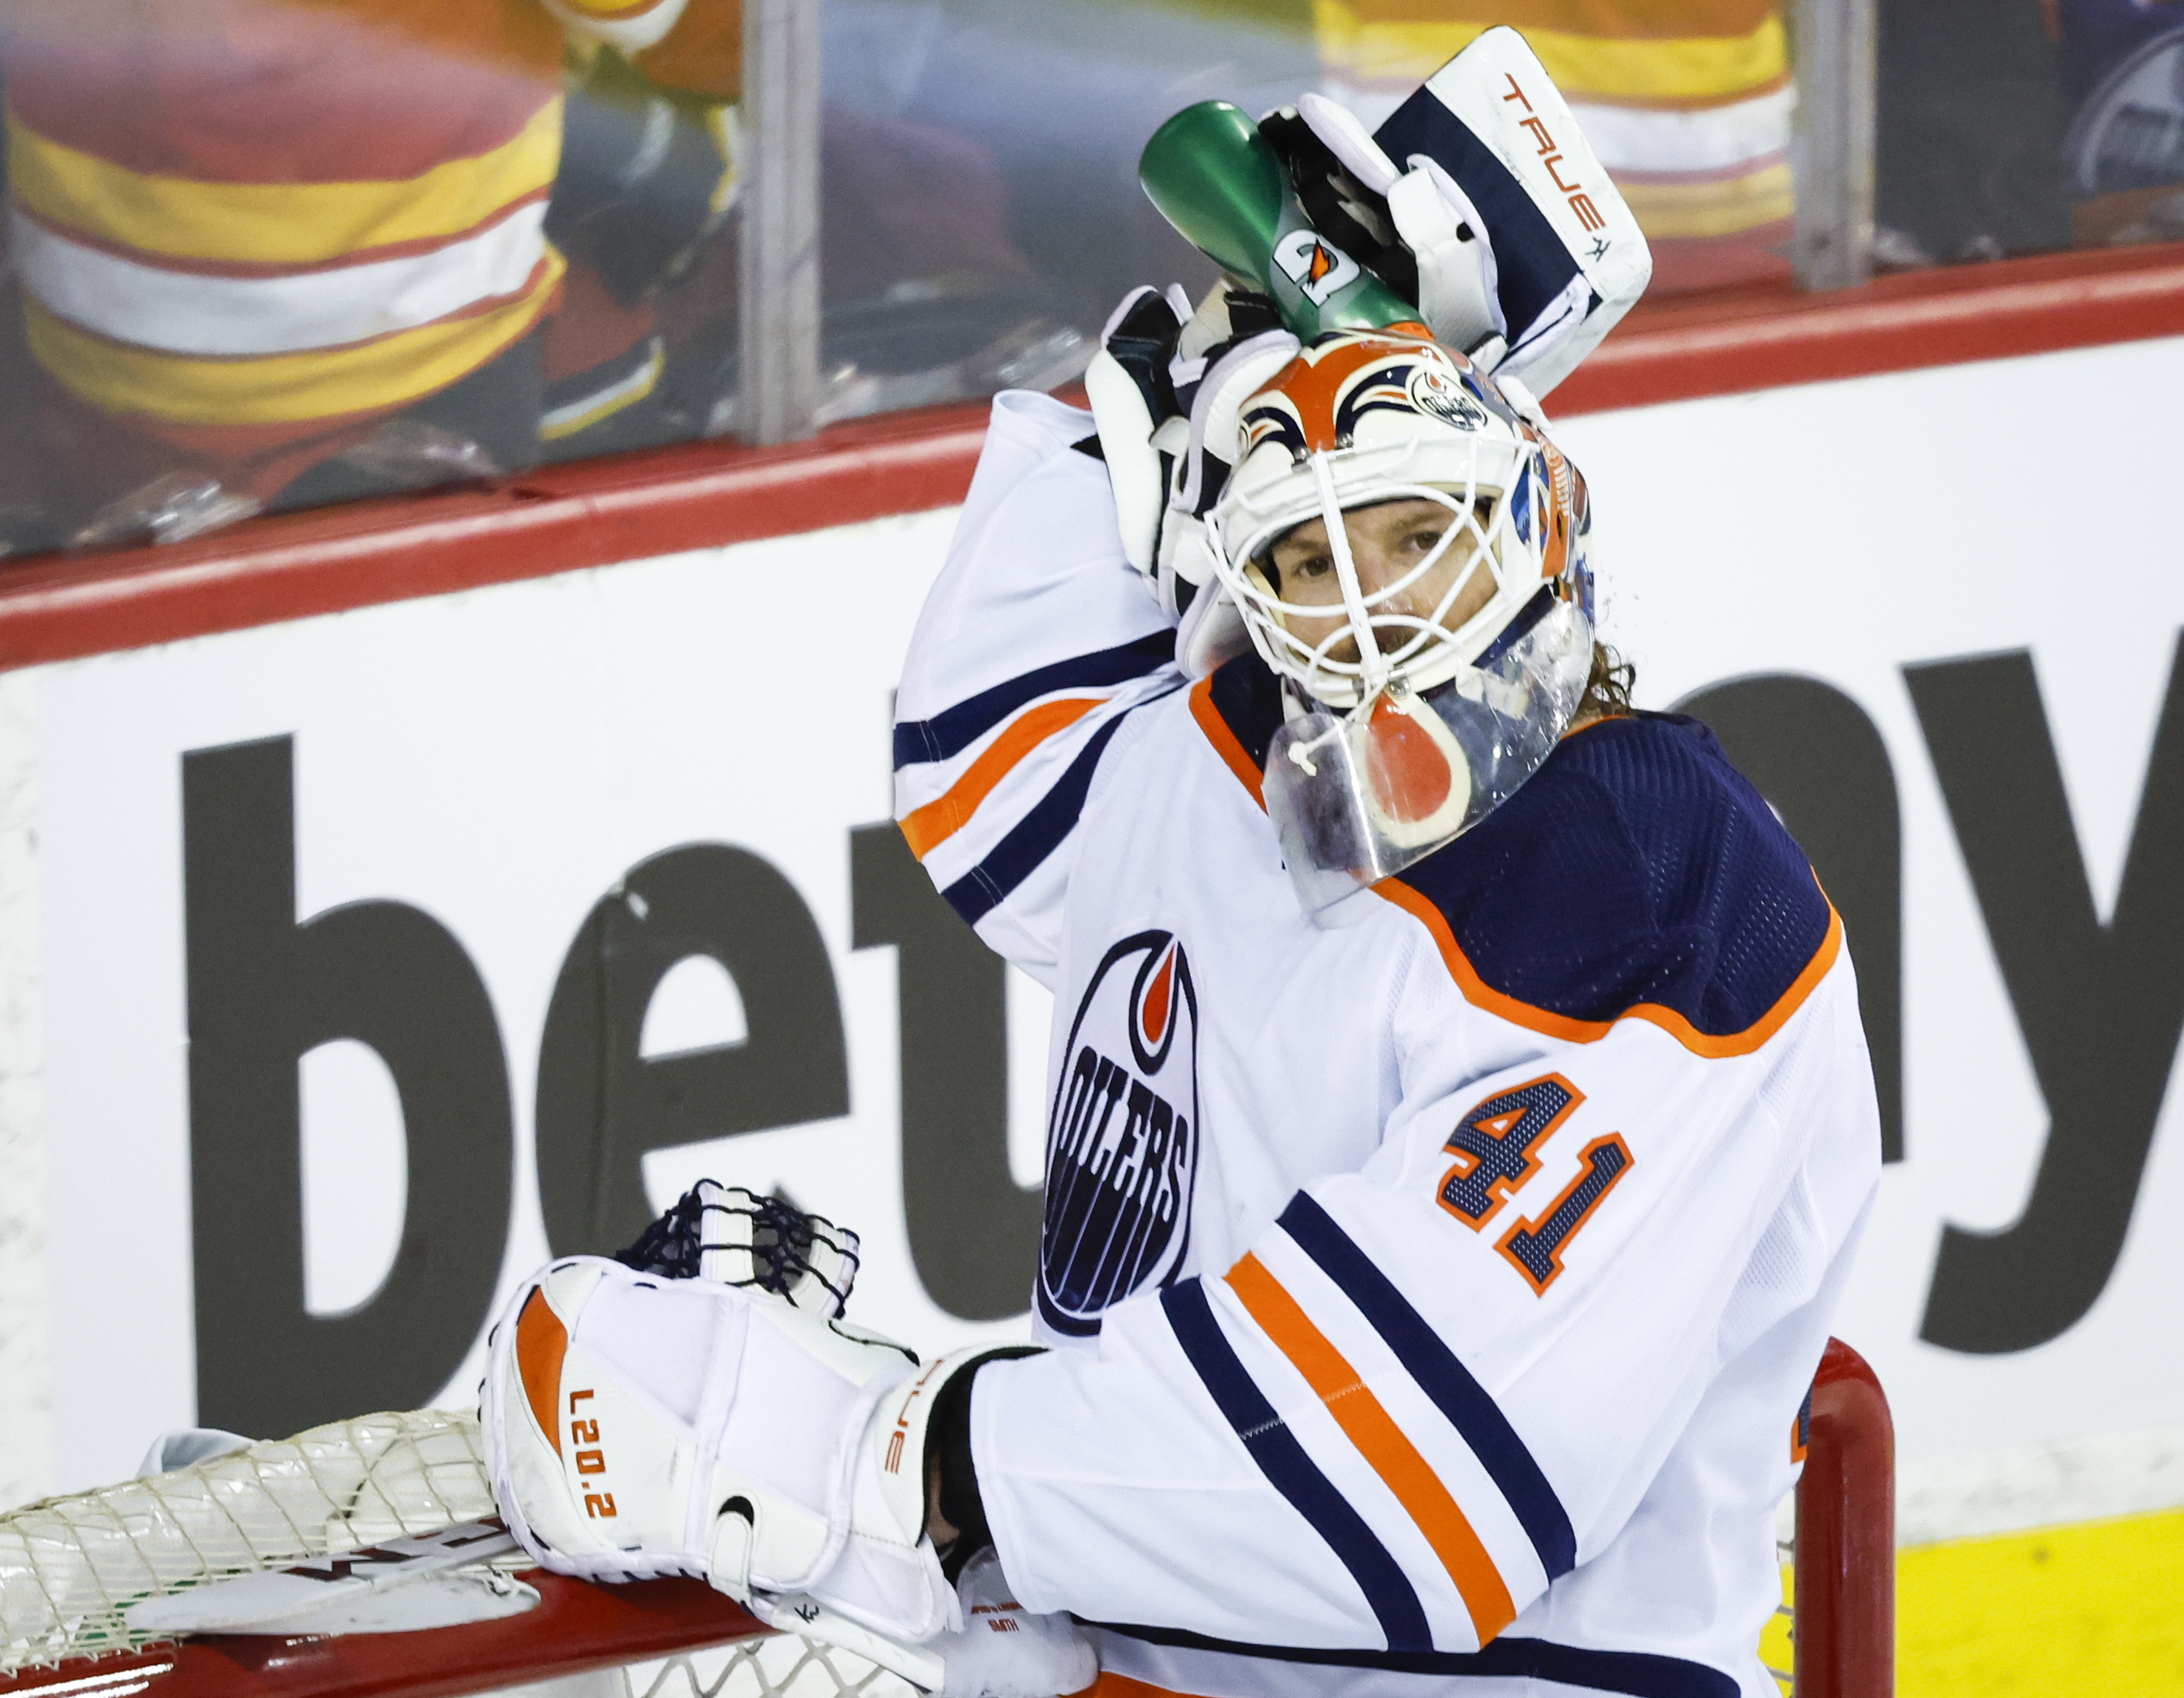 LIVE COVERAGE: Oilers at Flames